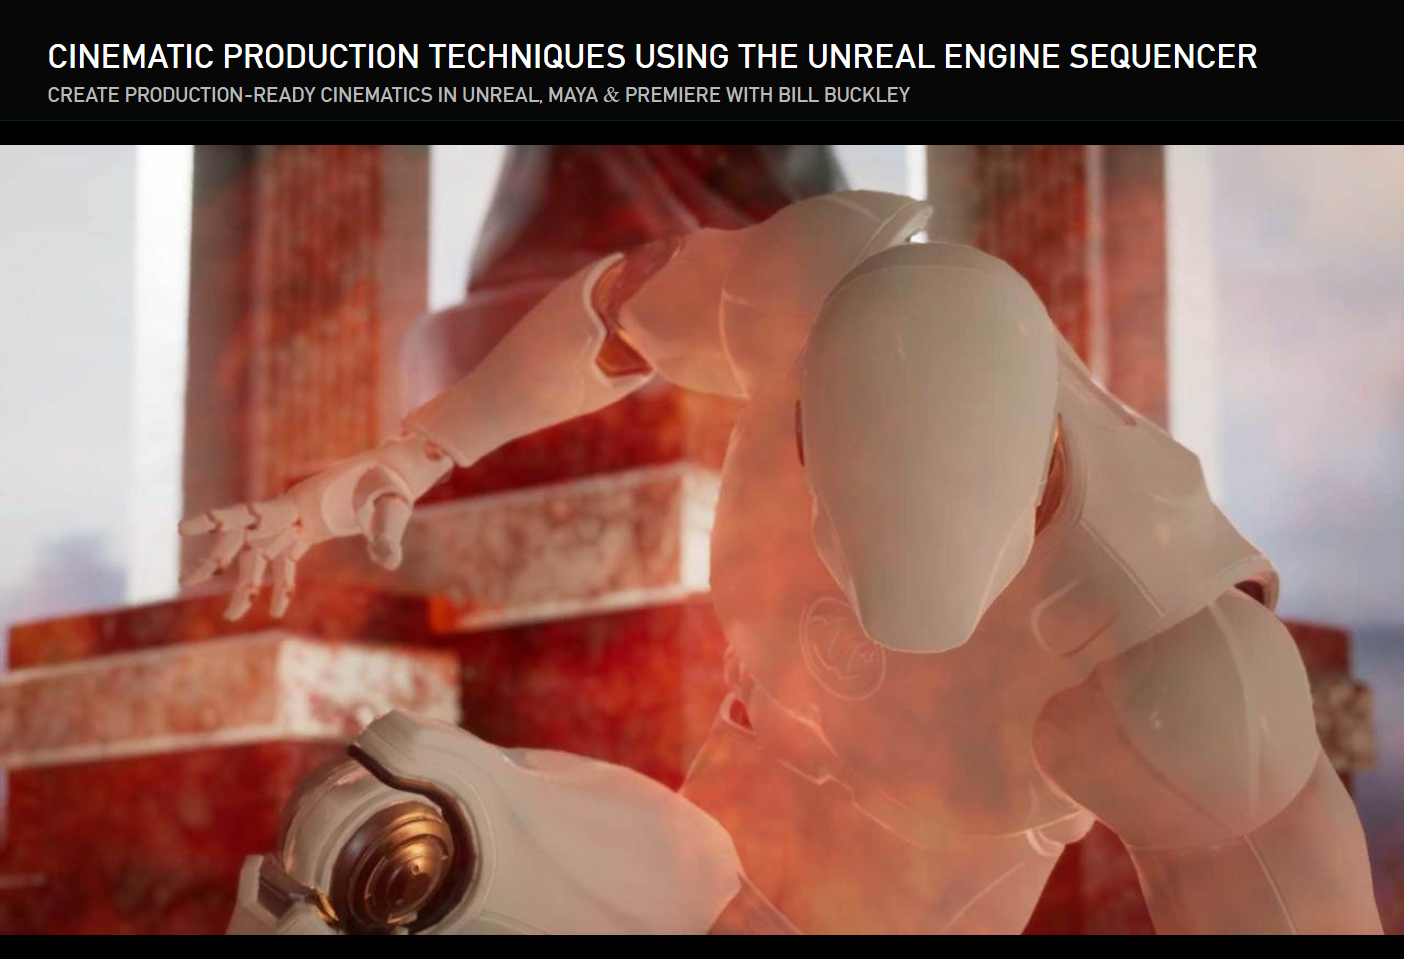 The Gnomon Workshop Cinematic Production Techniques Using the Unreal Engine Sequencer with Bill Buckley